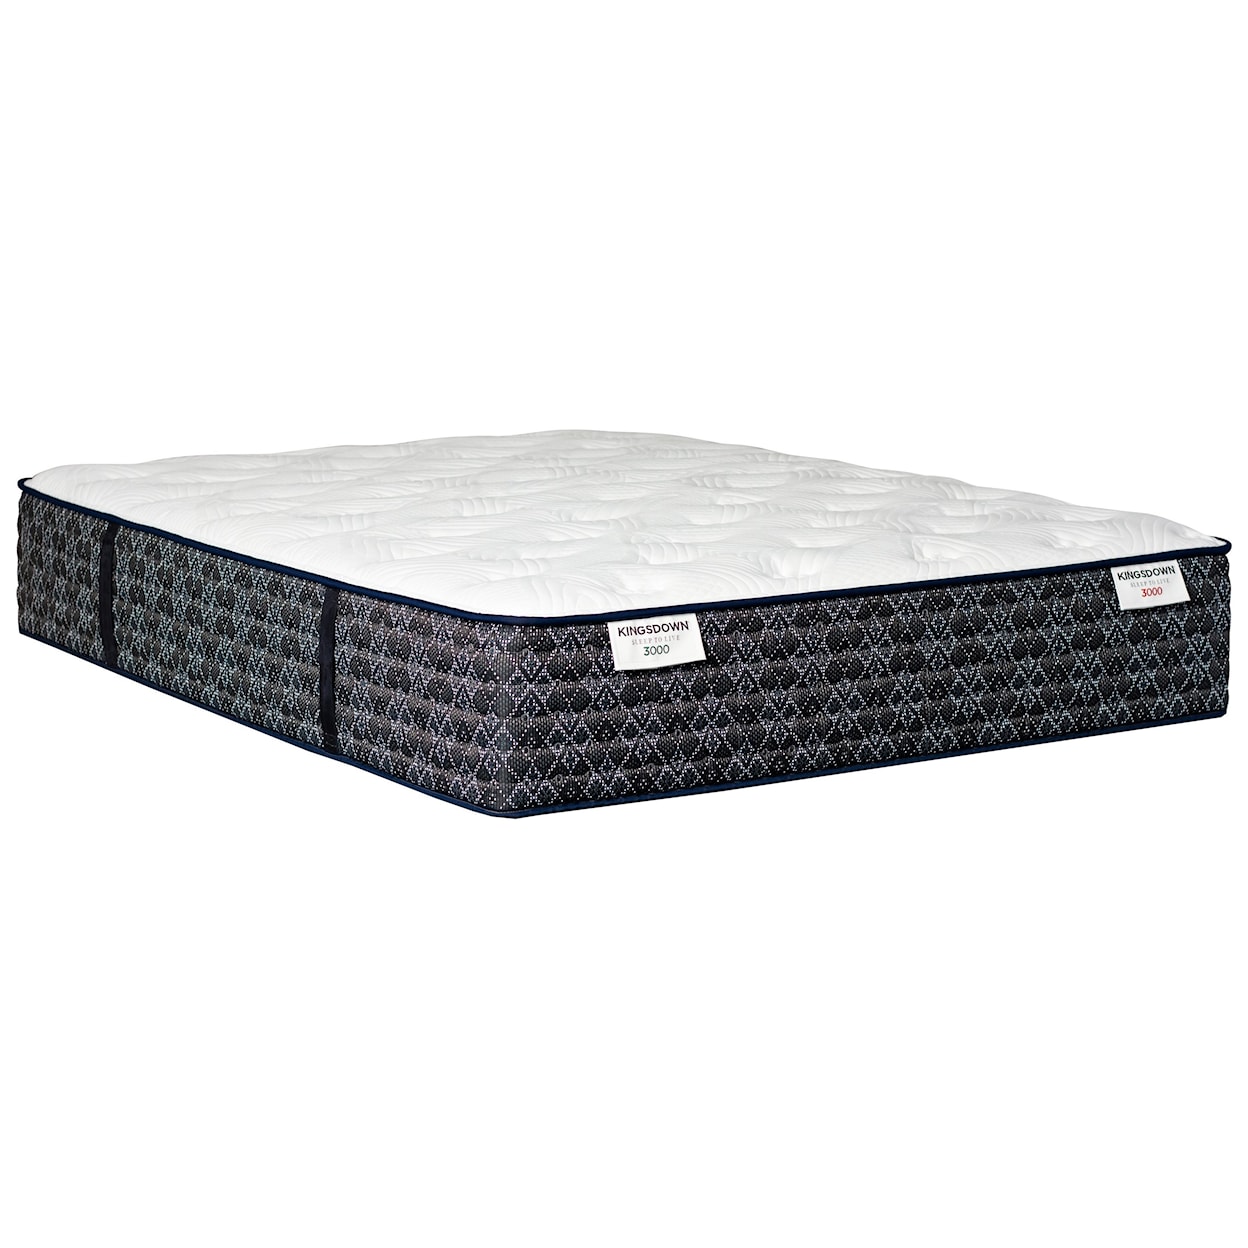 Kingsdown Sleep to Live 3000 Gold Blue Twin Pocketed Coil Mattress